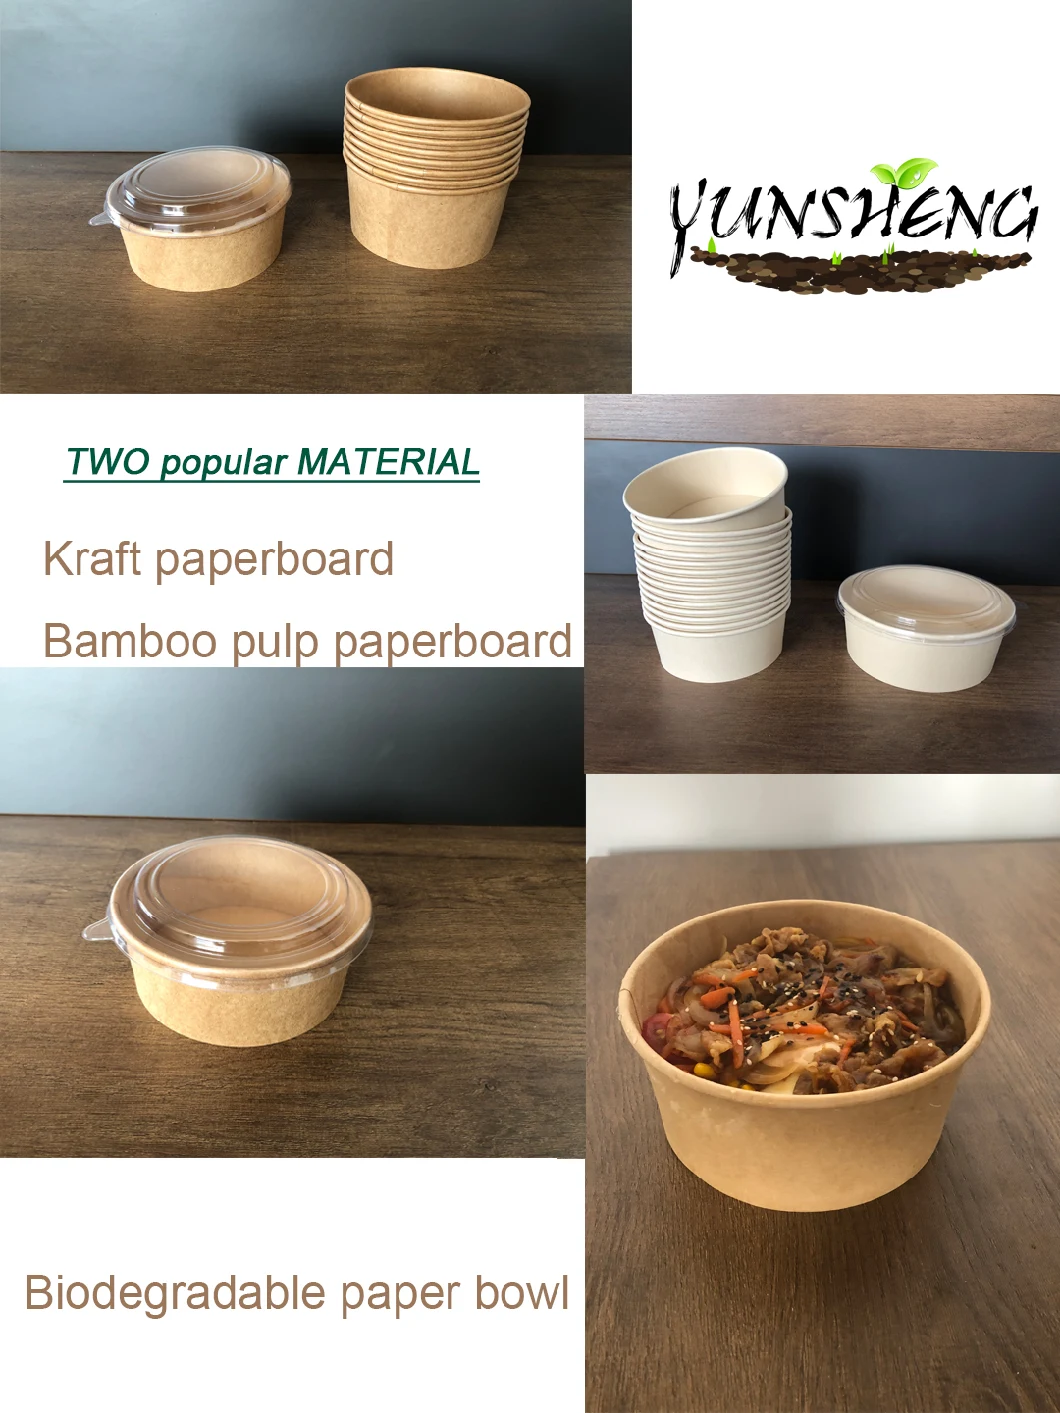 Degradable Disposable Brown or Light Brown Paper Folding Box/Customized Compostable Cardboard Box for Takeout Food